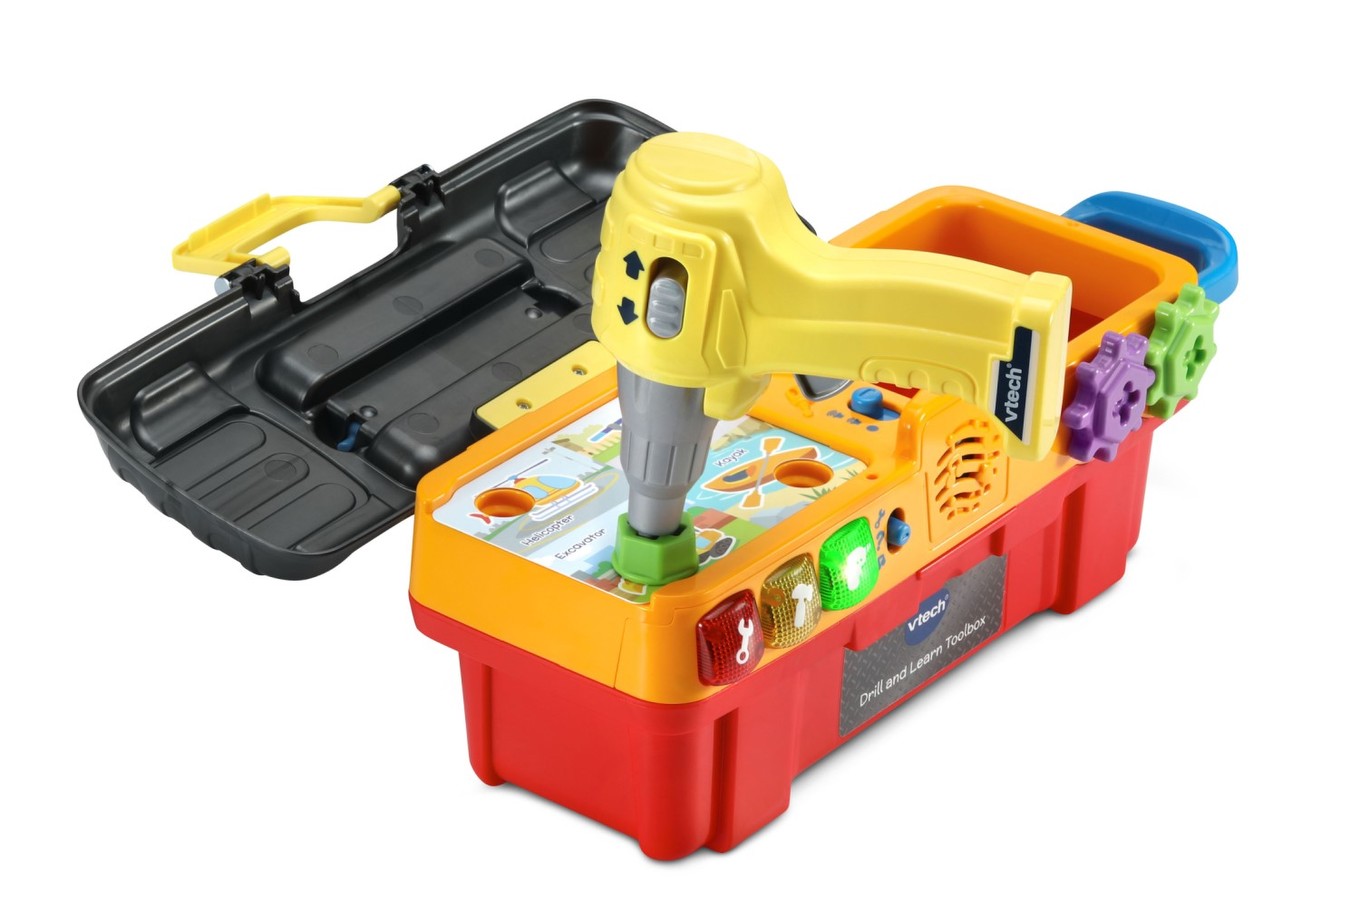 Drill Construction Vehicle Toys, Ambulance, Excavator and School